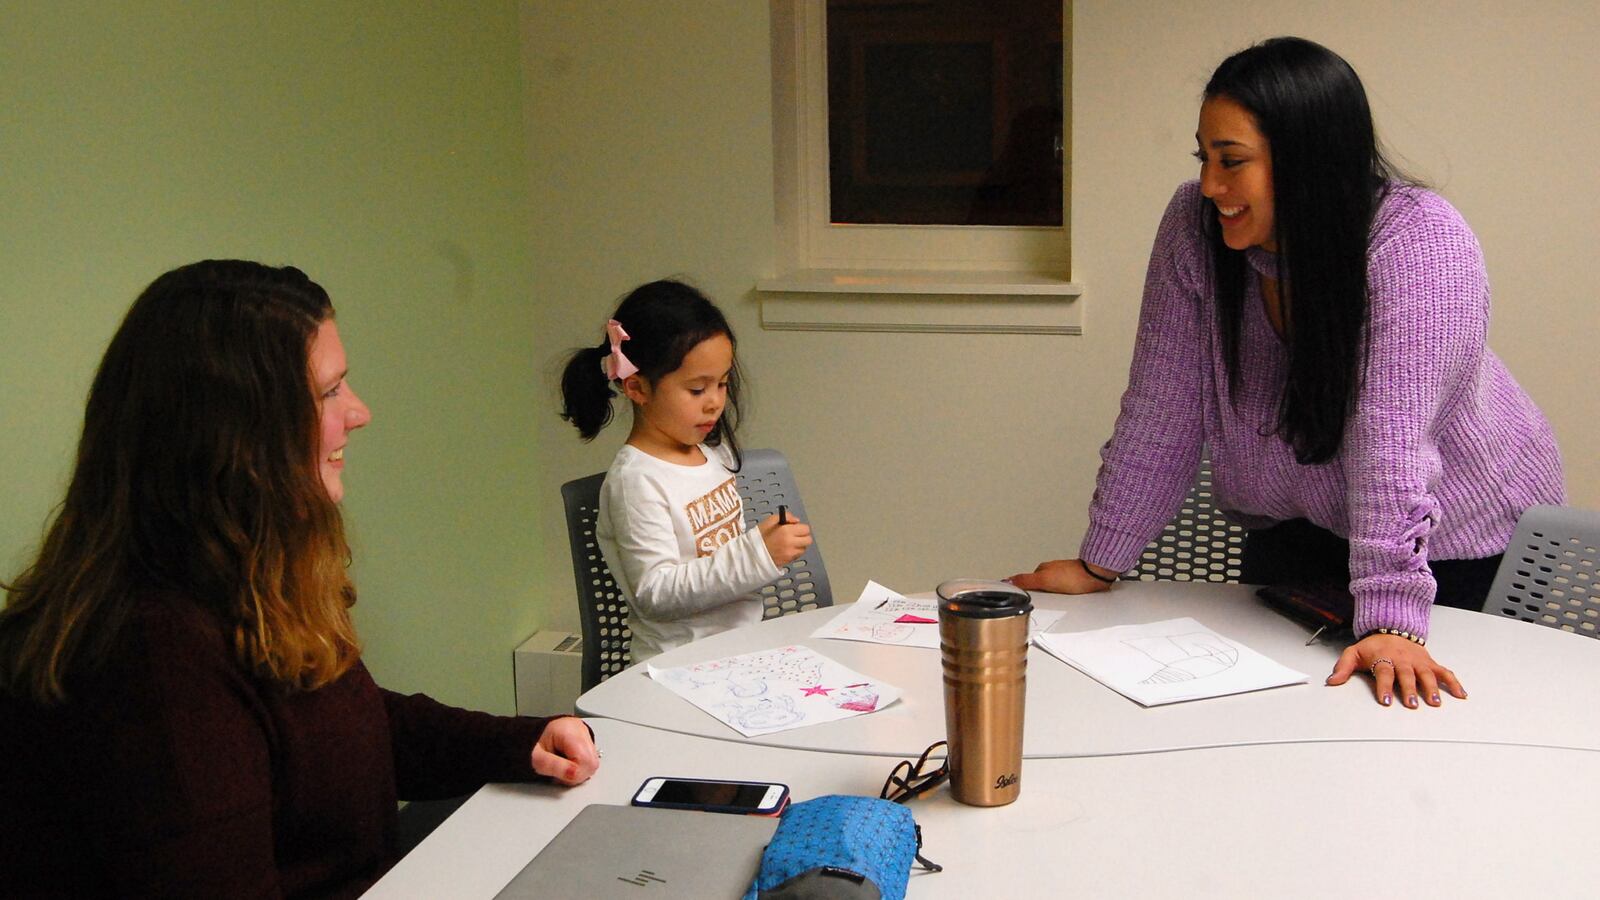 In December, Afrodita Salgado (right) brought her 5-year-old daughter, Amelia, to meet with her coach, Angela Crawford Neven, in a Chicago public library as part of a new online college program.